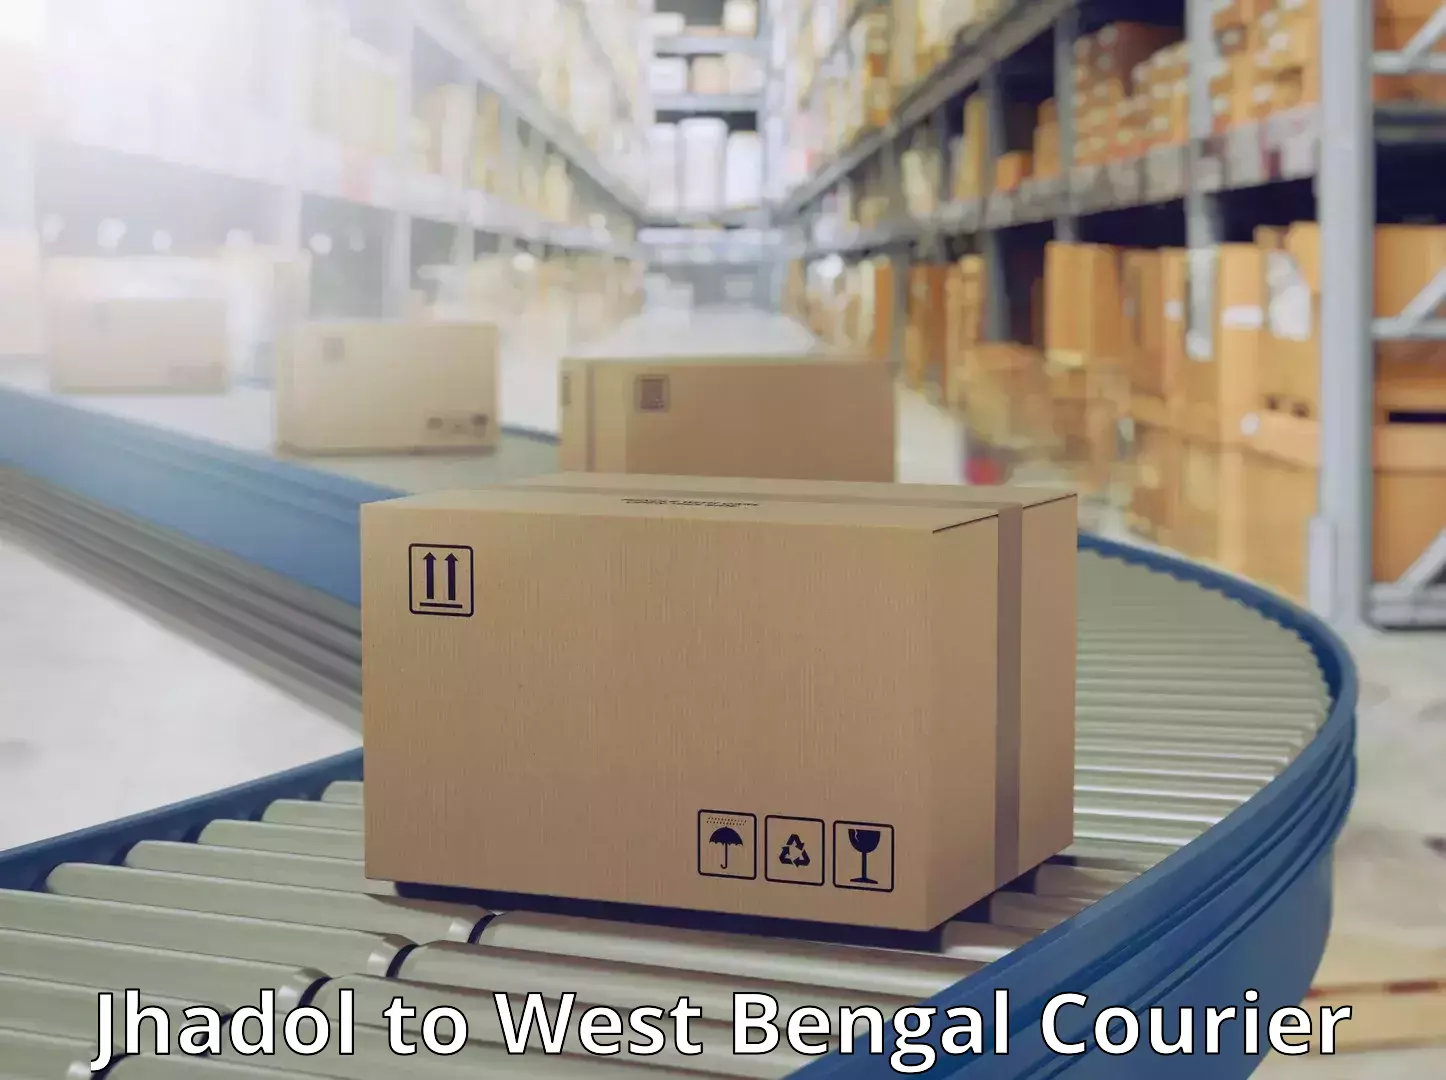 Modern delivery technologies Jhadol to West Bengal